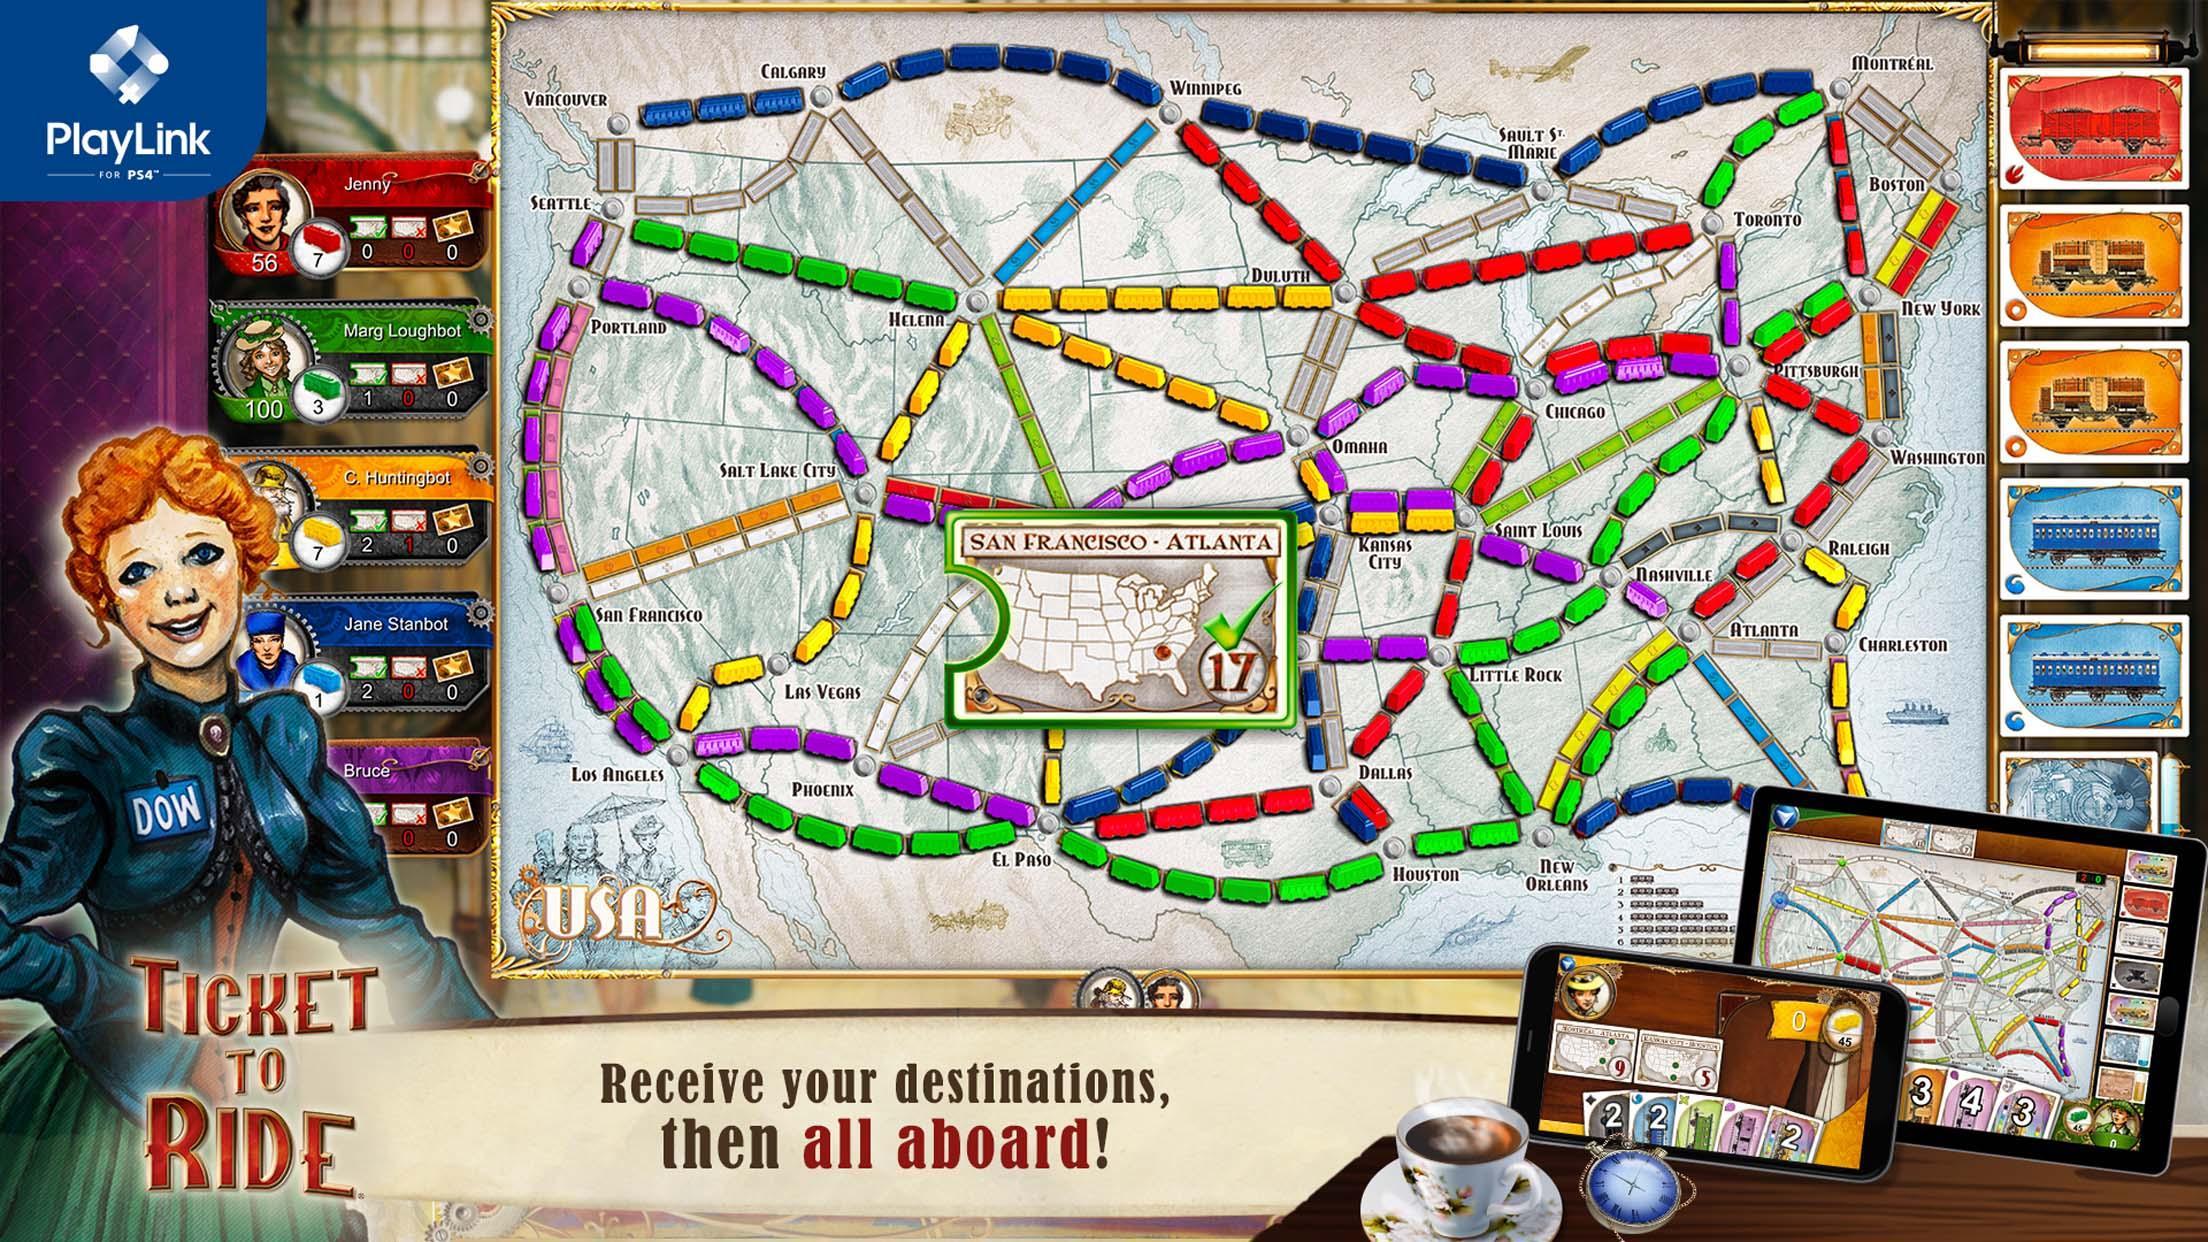 Ticket to Ride for PlayLink 2.7.2-6472-ceb1ea16 Screenshot 2